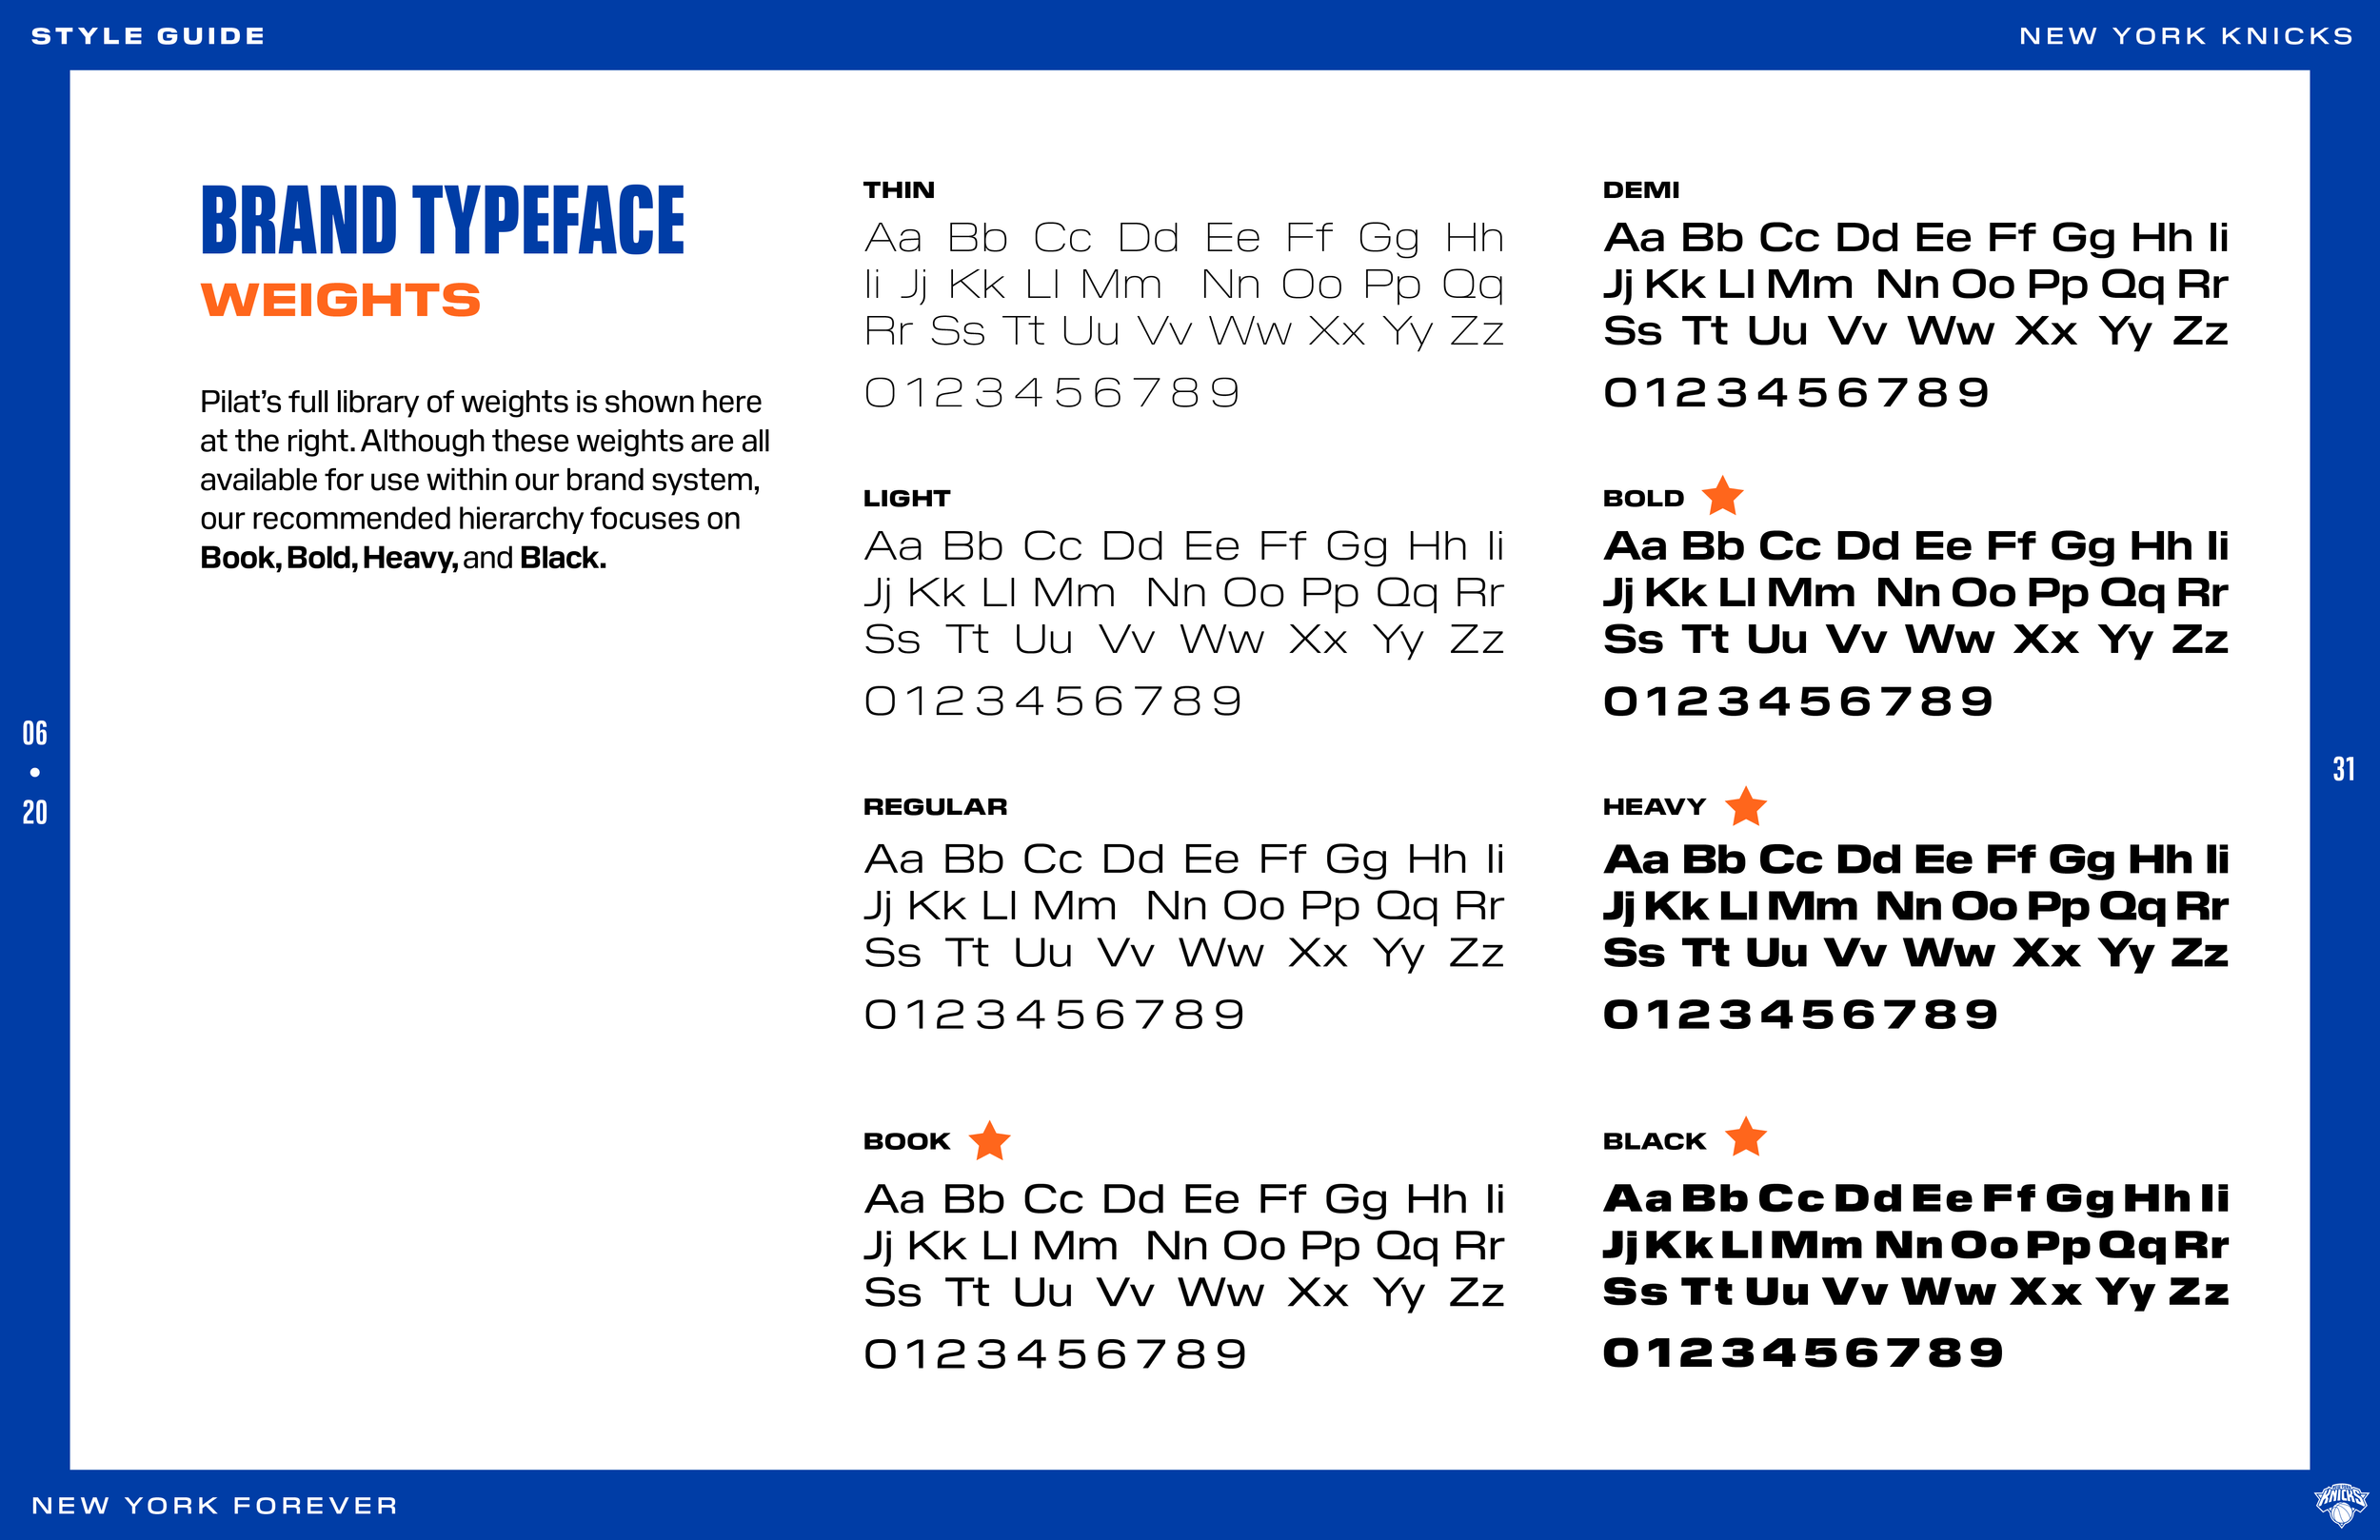 Pages from KNICKS_StyleGuide_062420 31.png